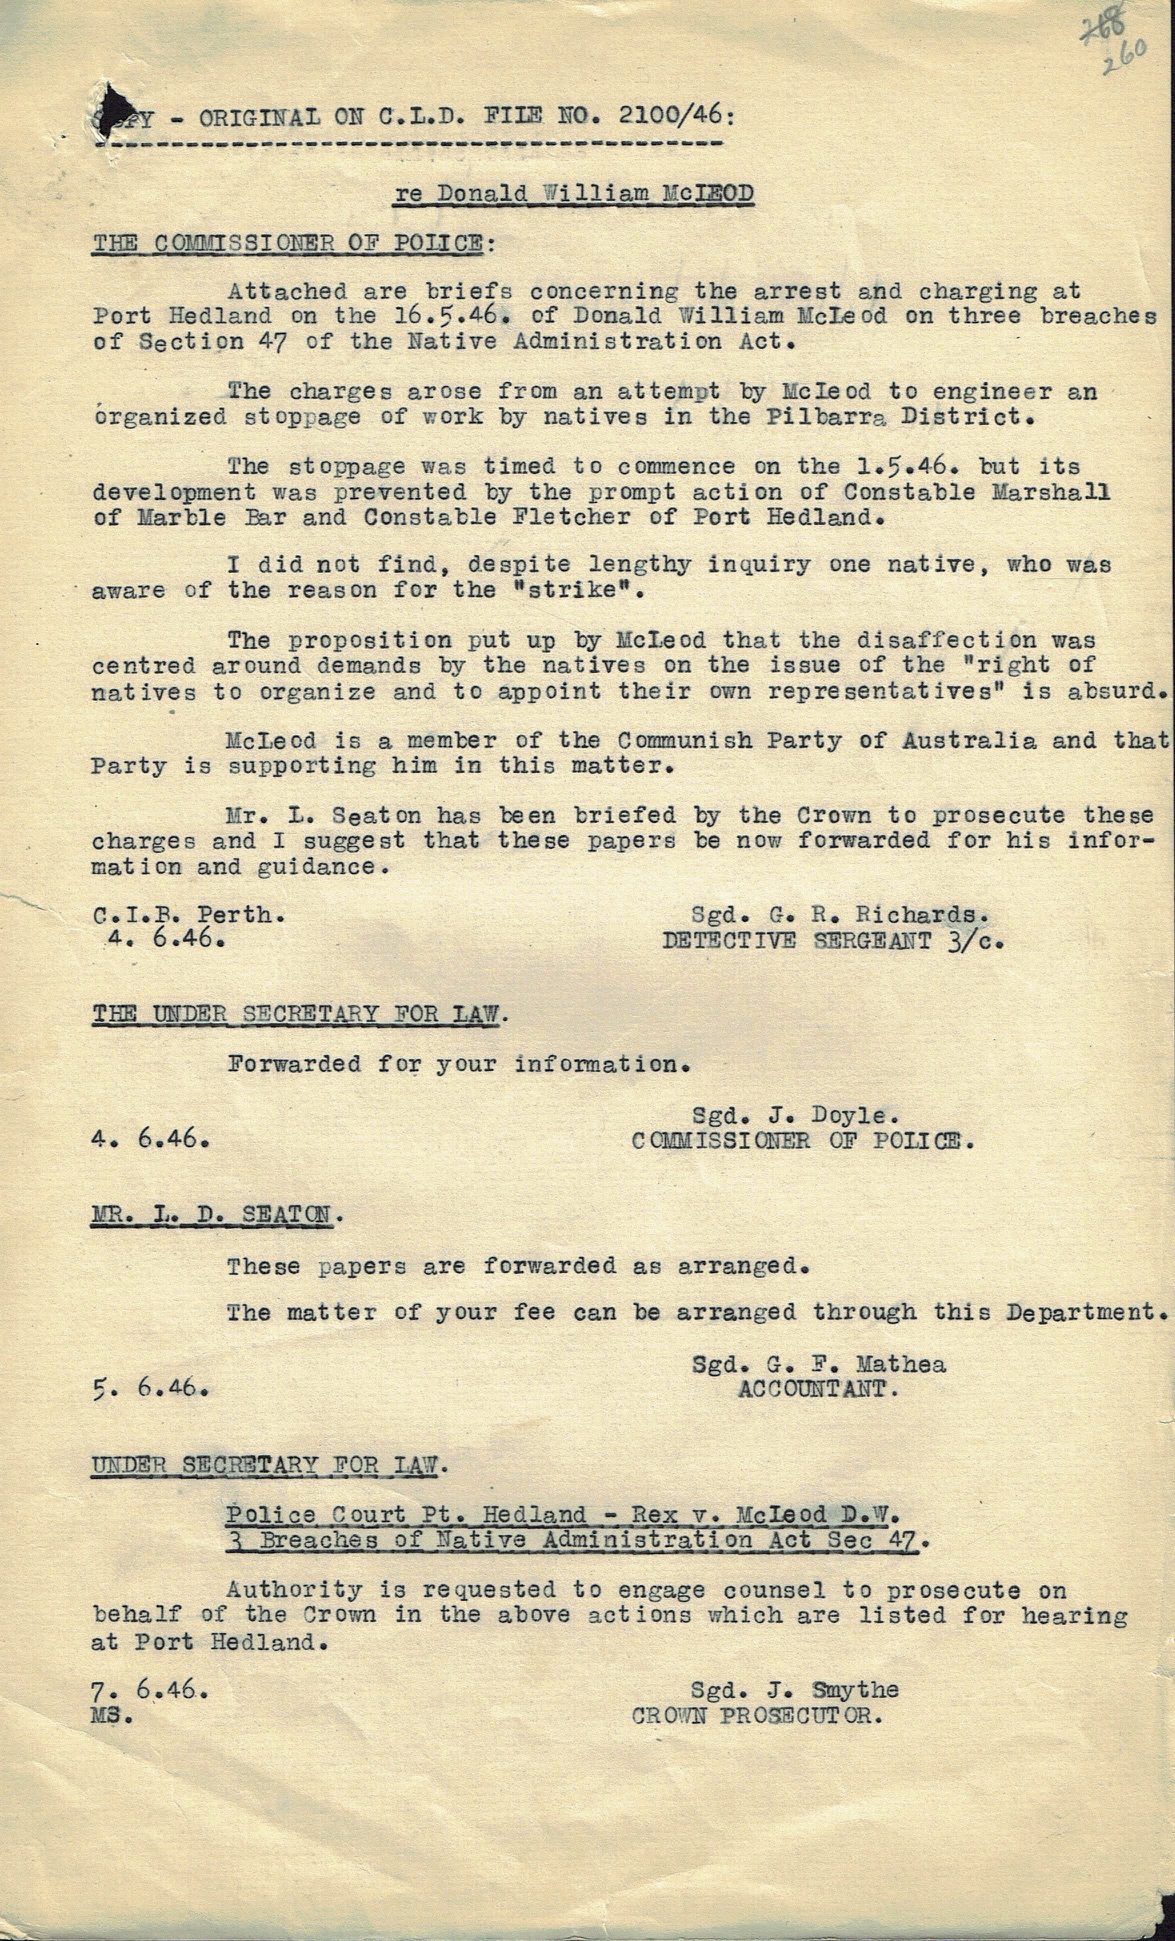 Richards to Commissioner of Police, 4 June 1946